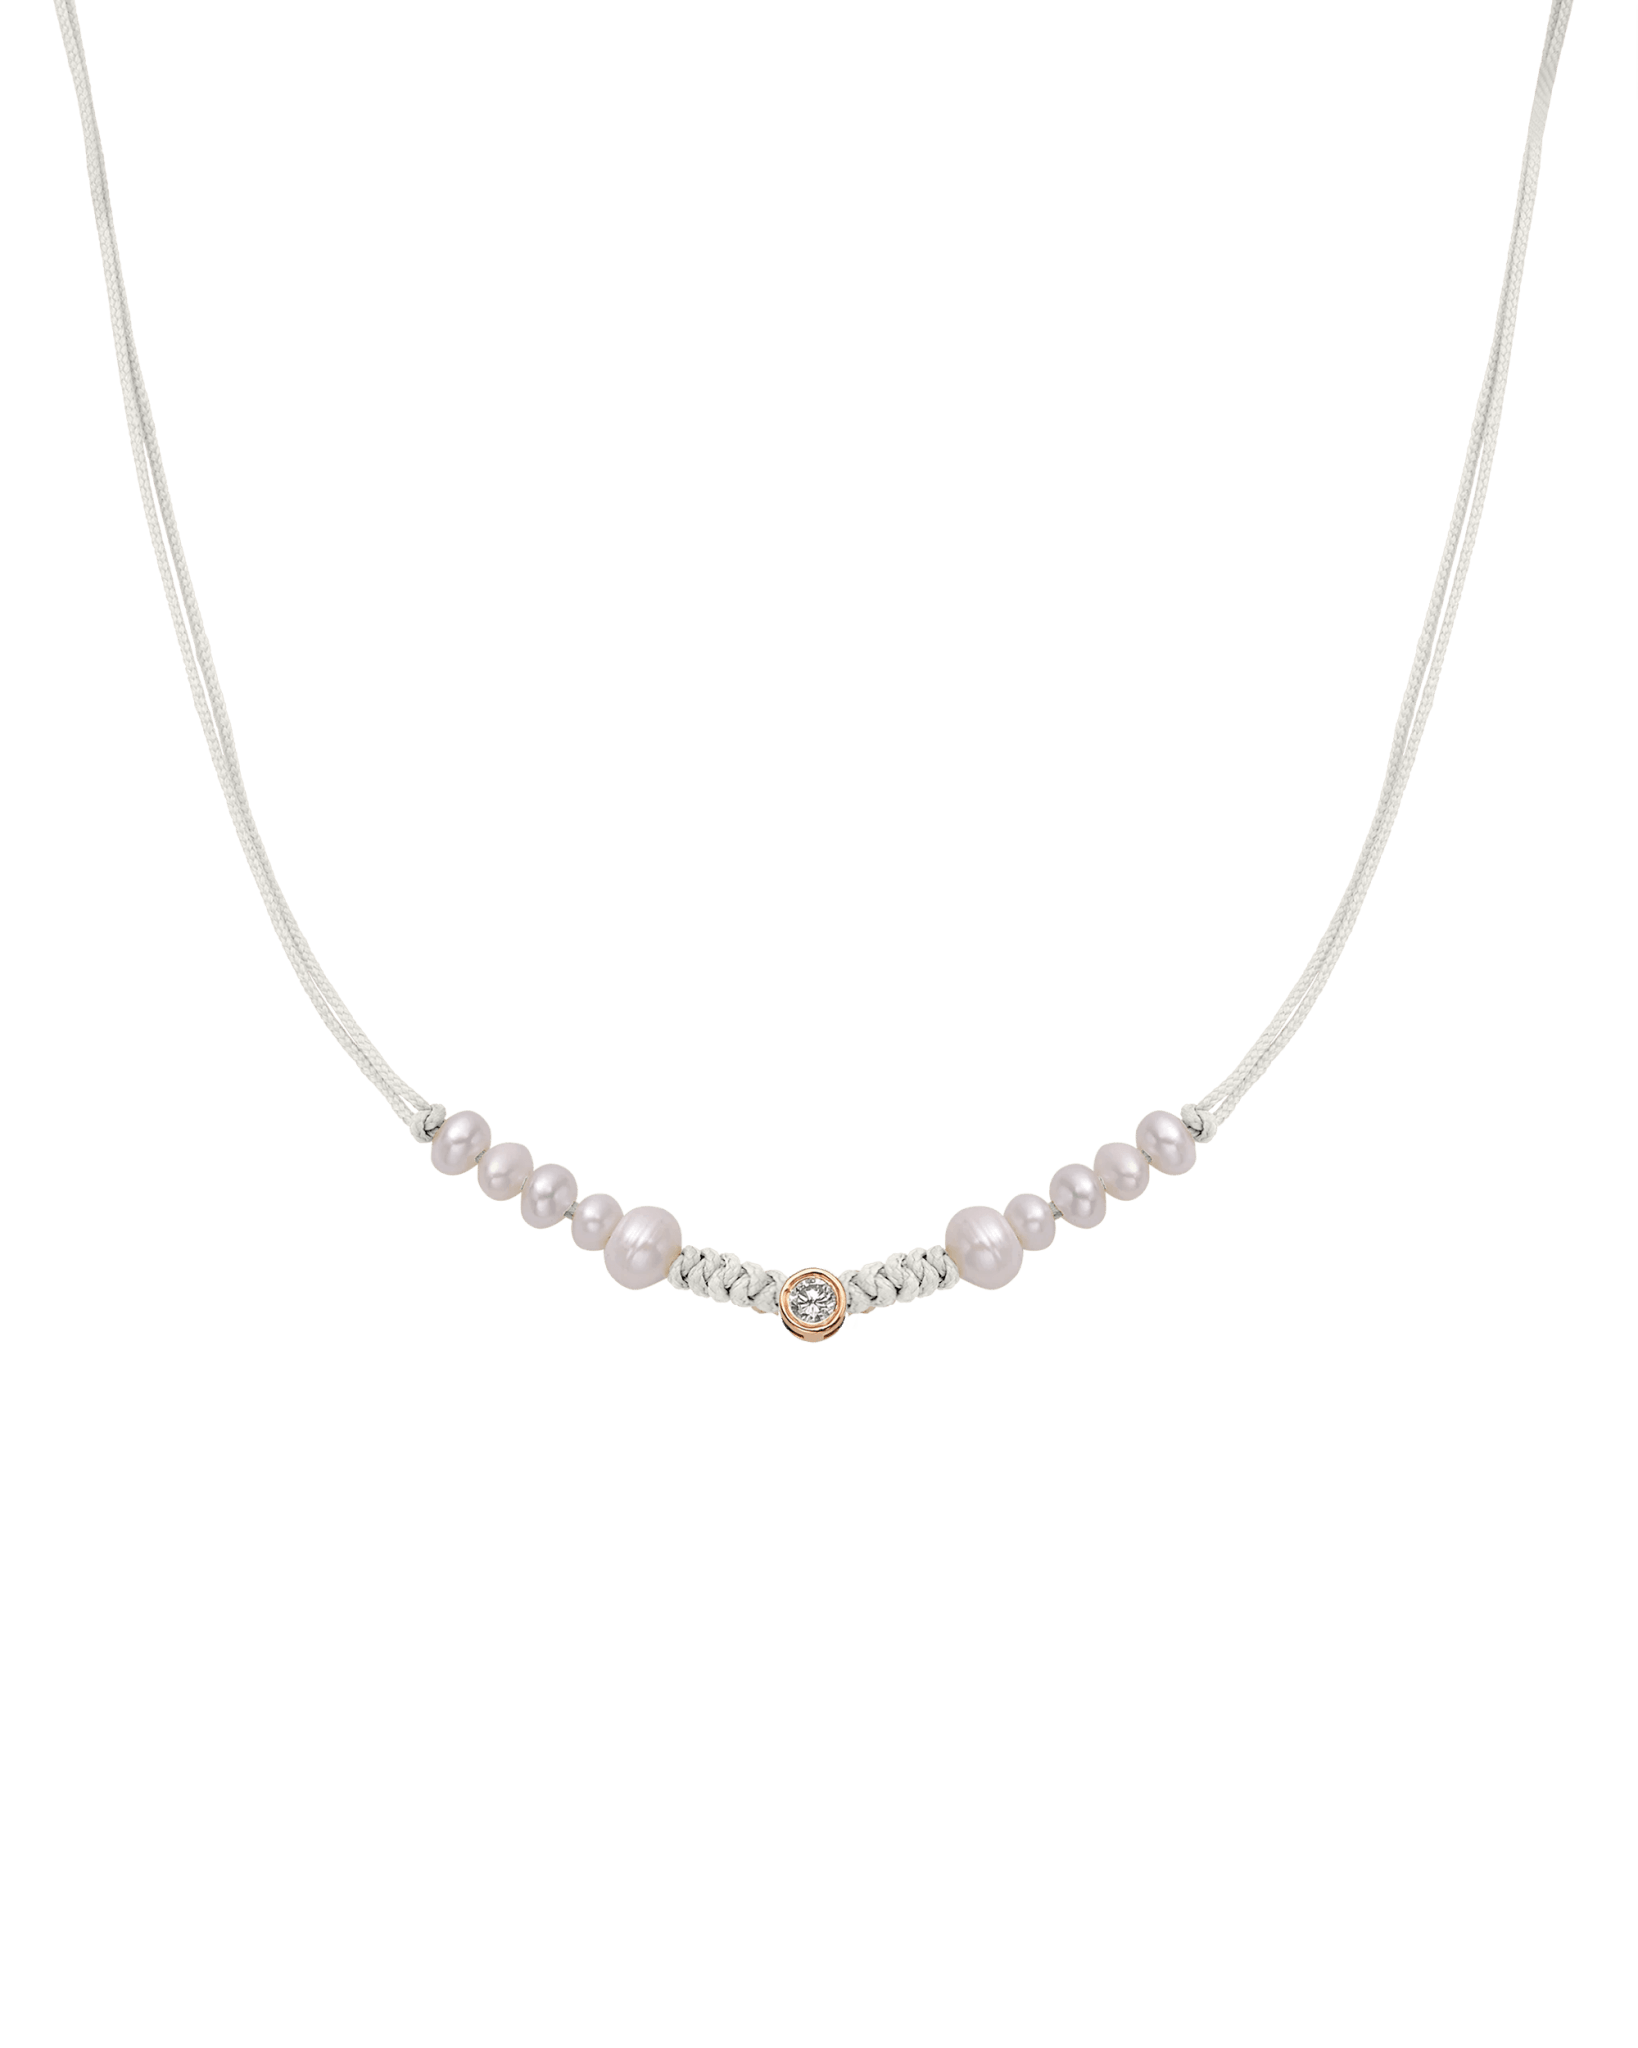 Ten Natural Pearl String of Love Necklace - 14K Rose Gold Necklaces 14K Solid Gold Pearl Large: 0.1ct 